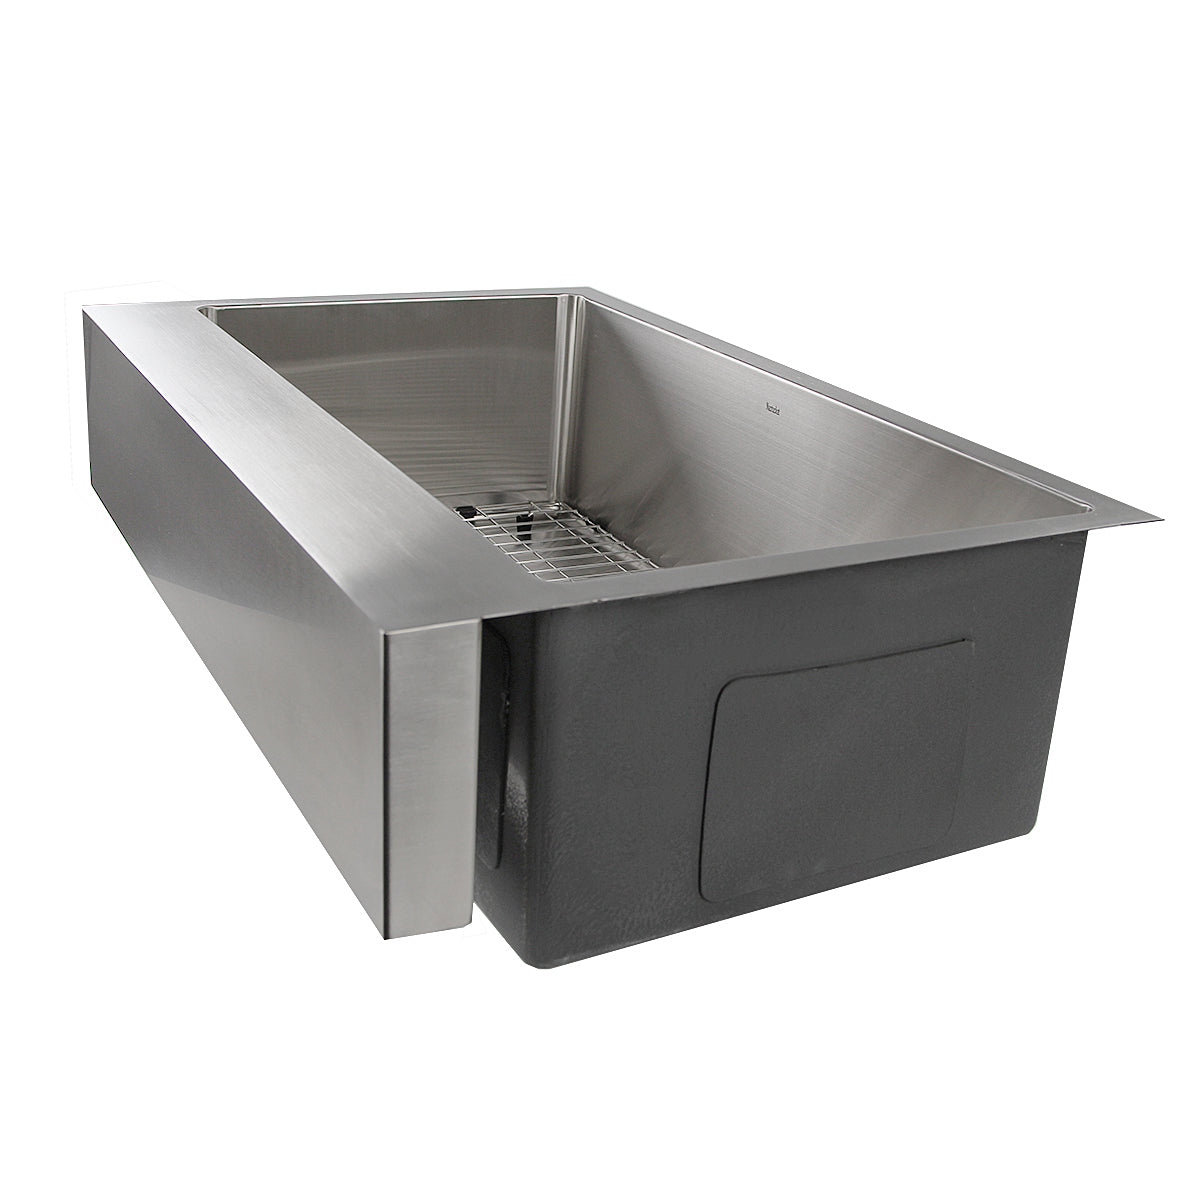 Nantucket Sinks' EZApron33 Patented Design Pro Series Single Bowl Undermount  Stainless Steel Kitchen Sink with 7 Inch Apron Front